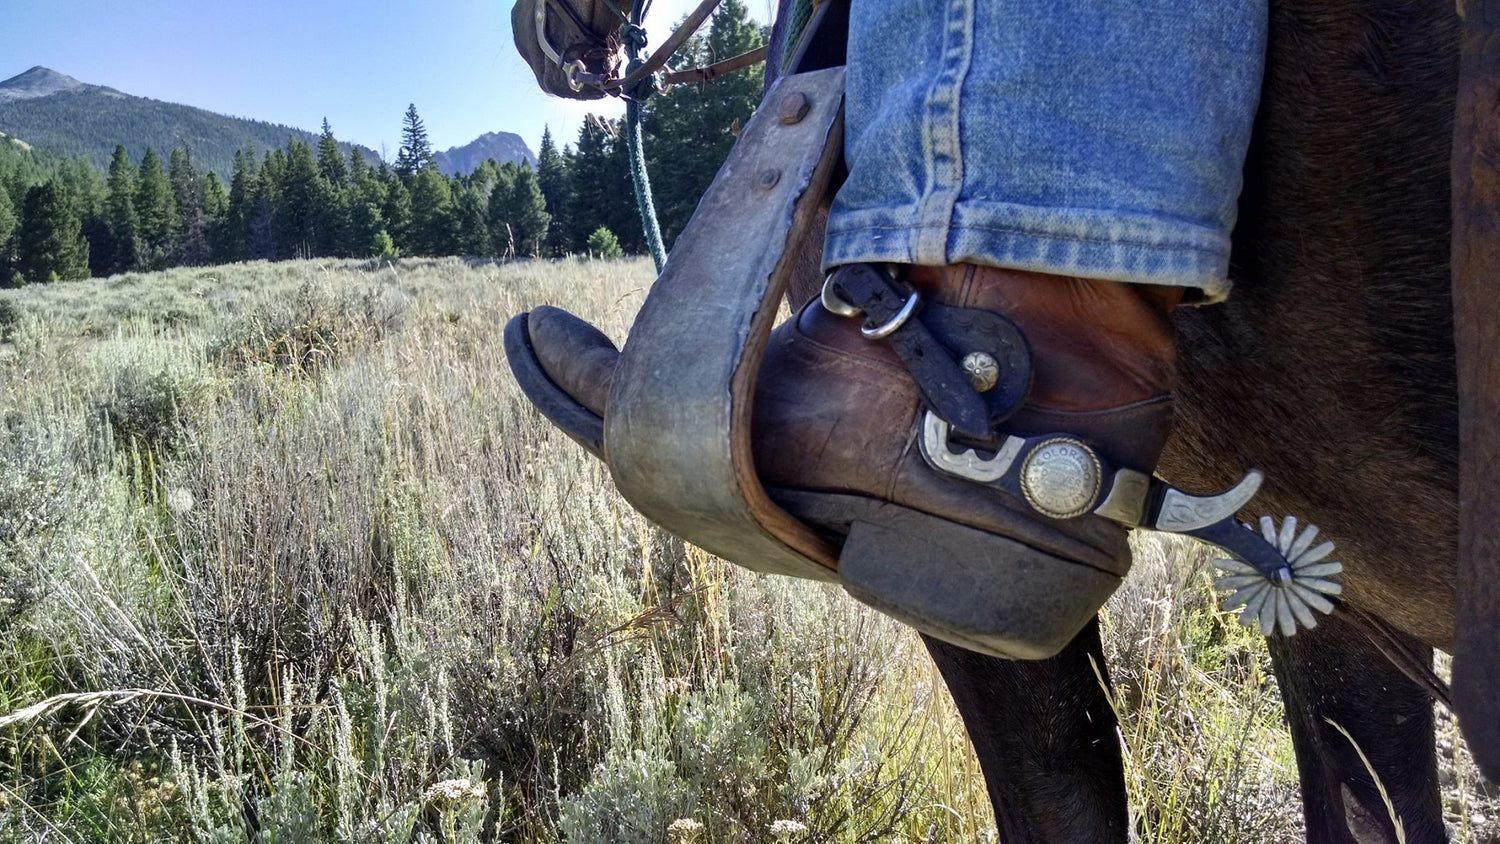 Are Cowboy Boots Good For Riding Horses?